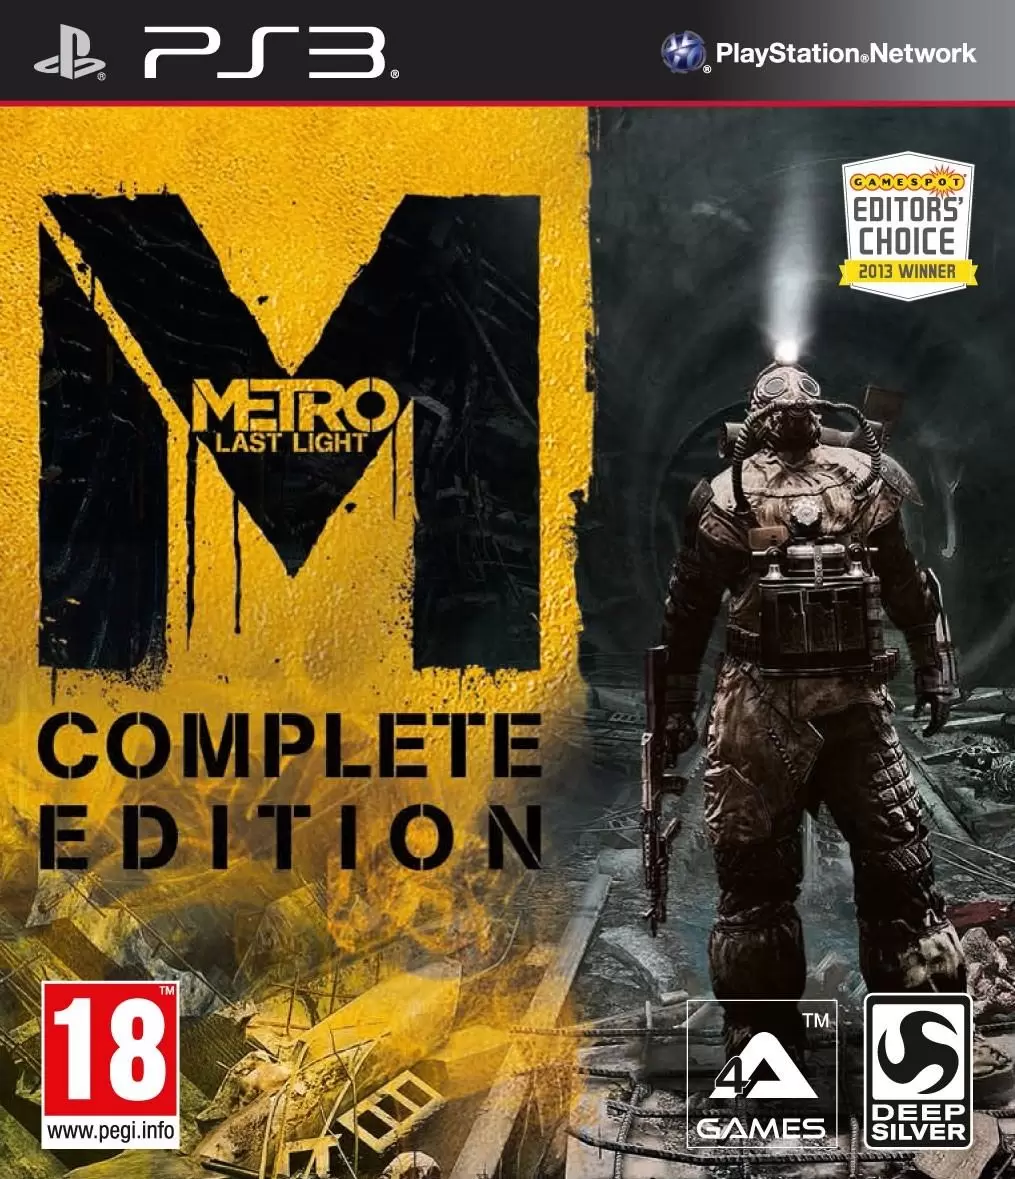 PS3 Games - Metro: Last Light - Complete Edition